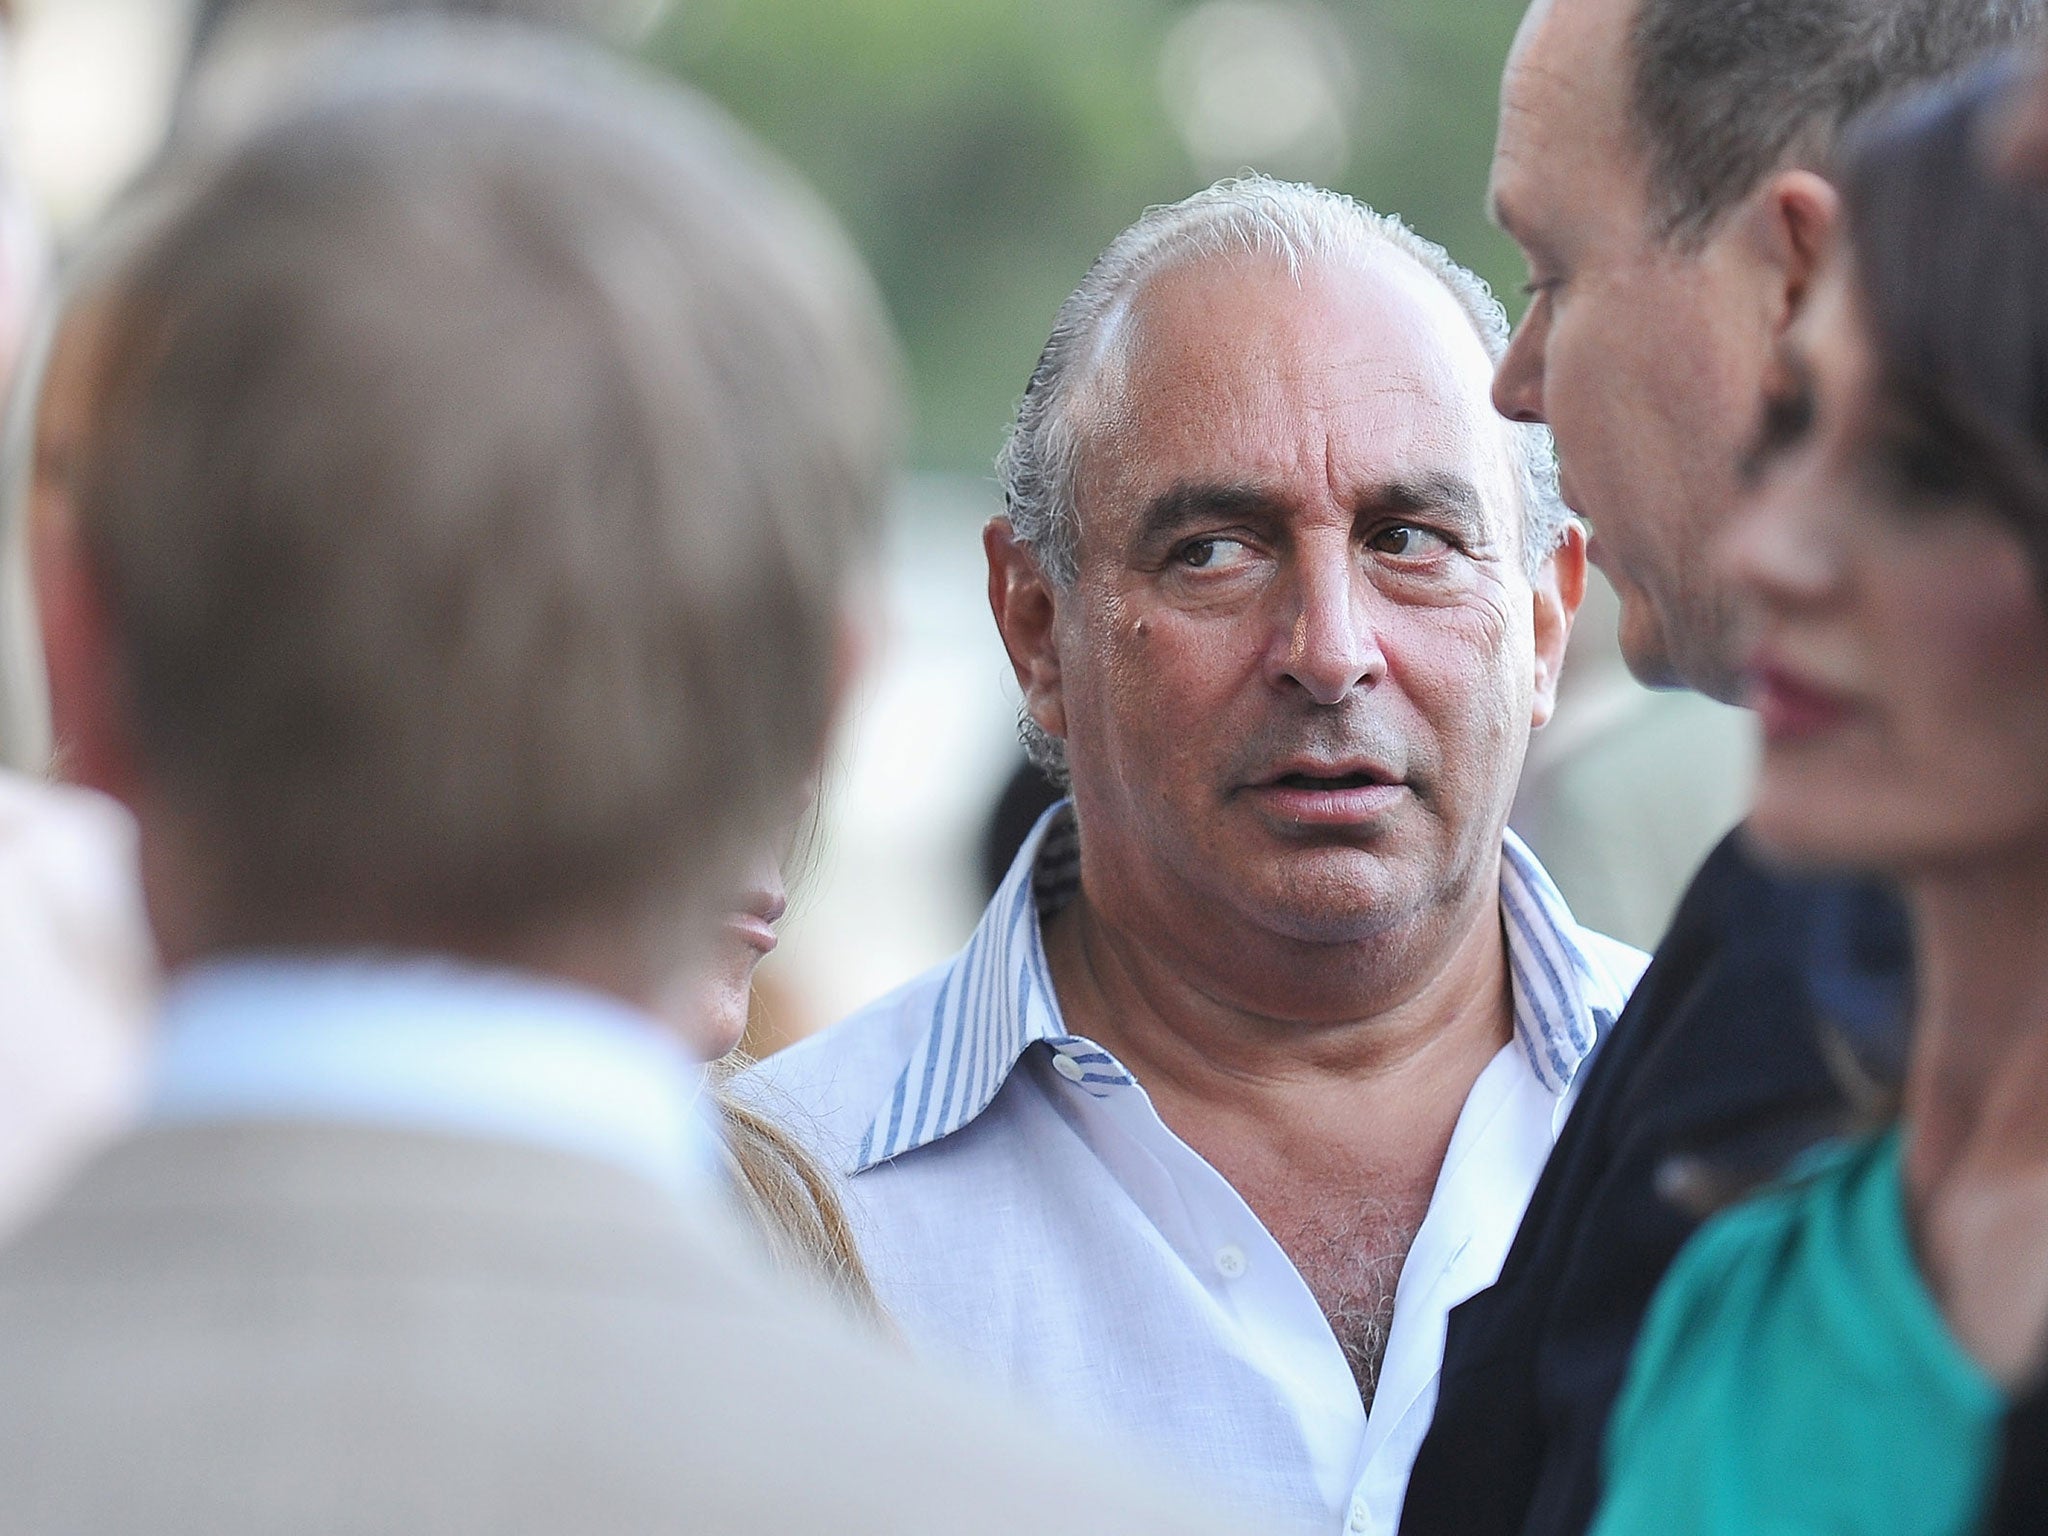 Sir Philip Green made millions out of Bhs before he sold it